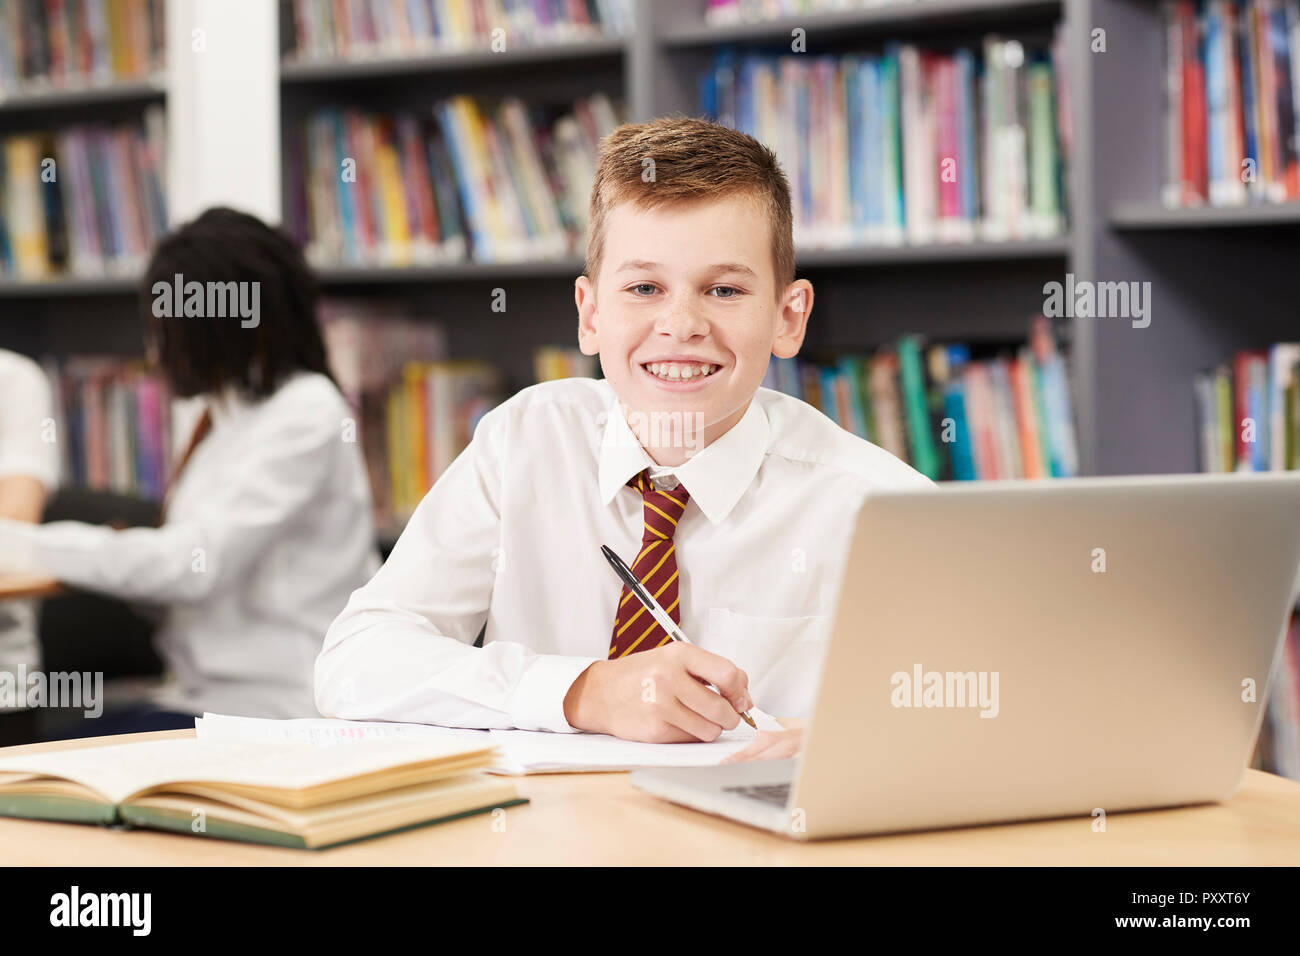 Portrait Of Male High School Student Wearing Uniform Working At Laptop In Library Stock Photo